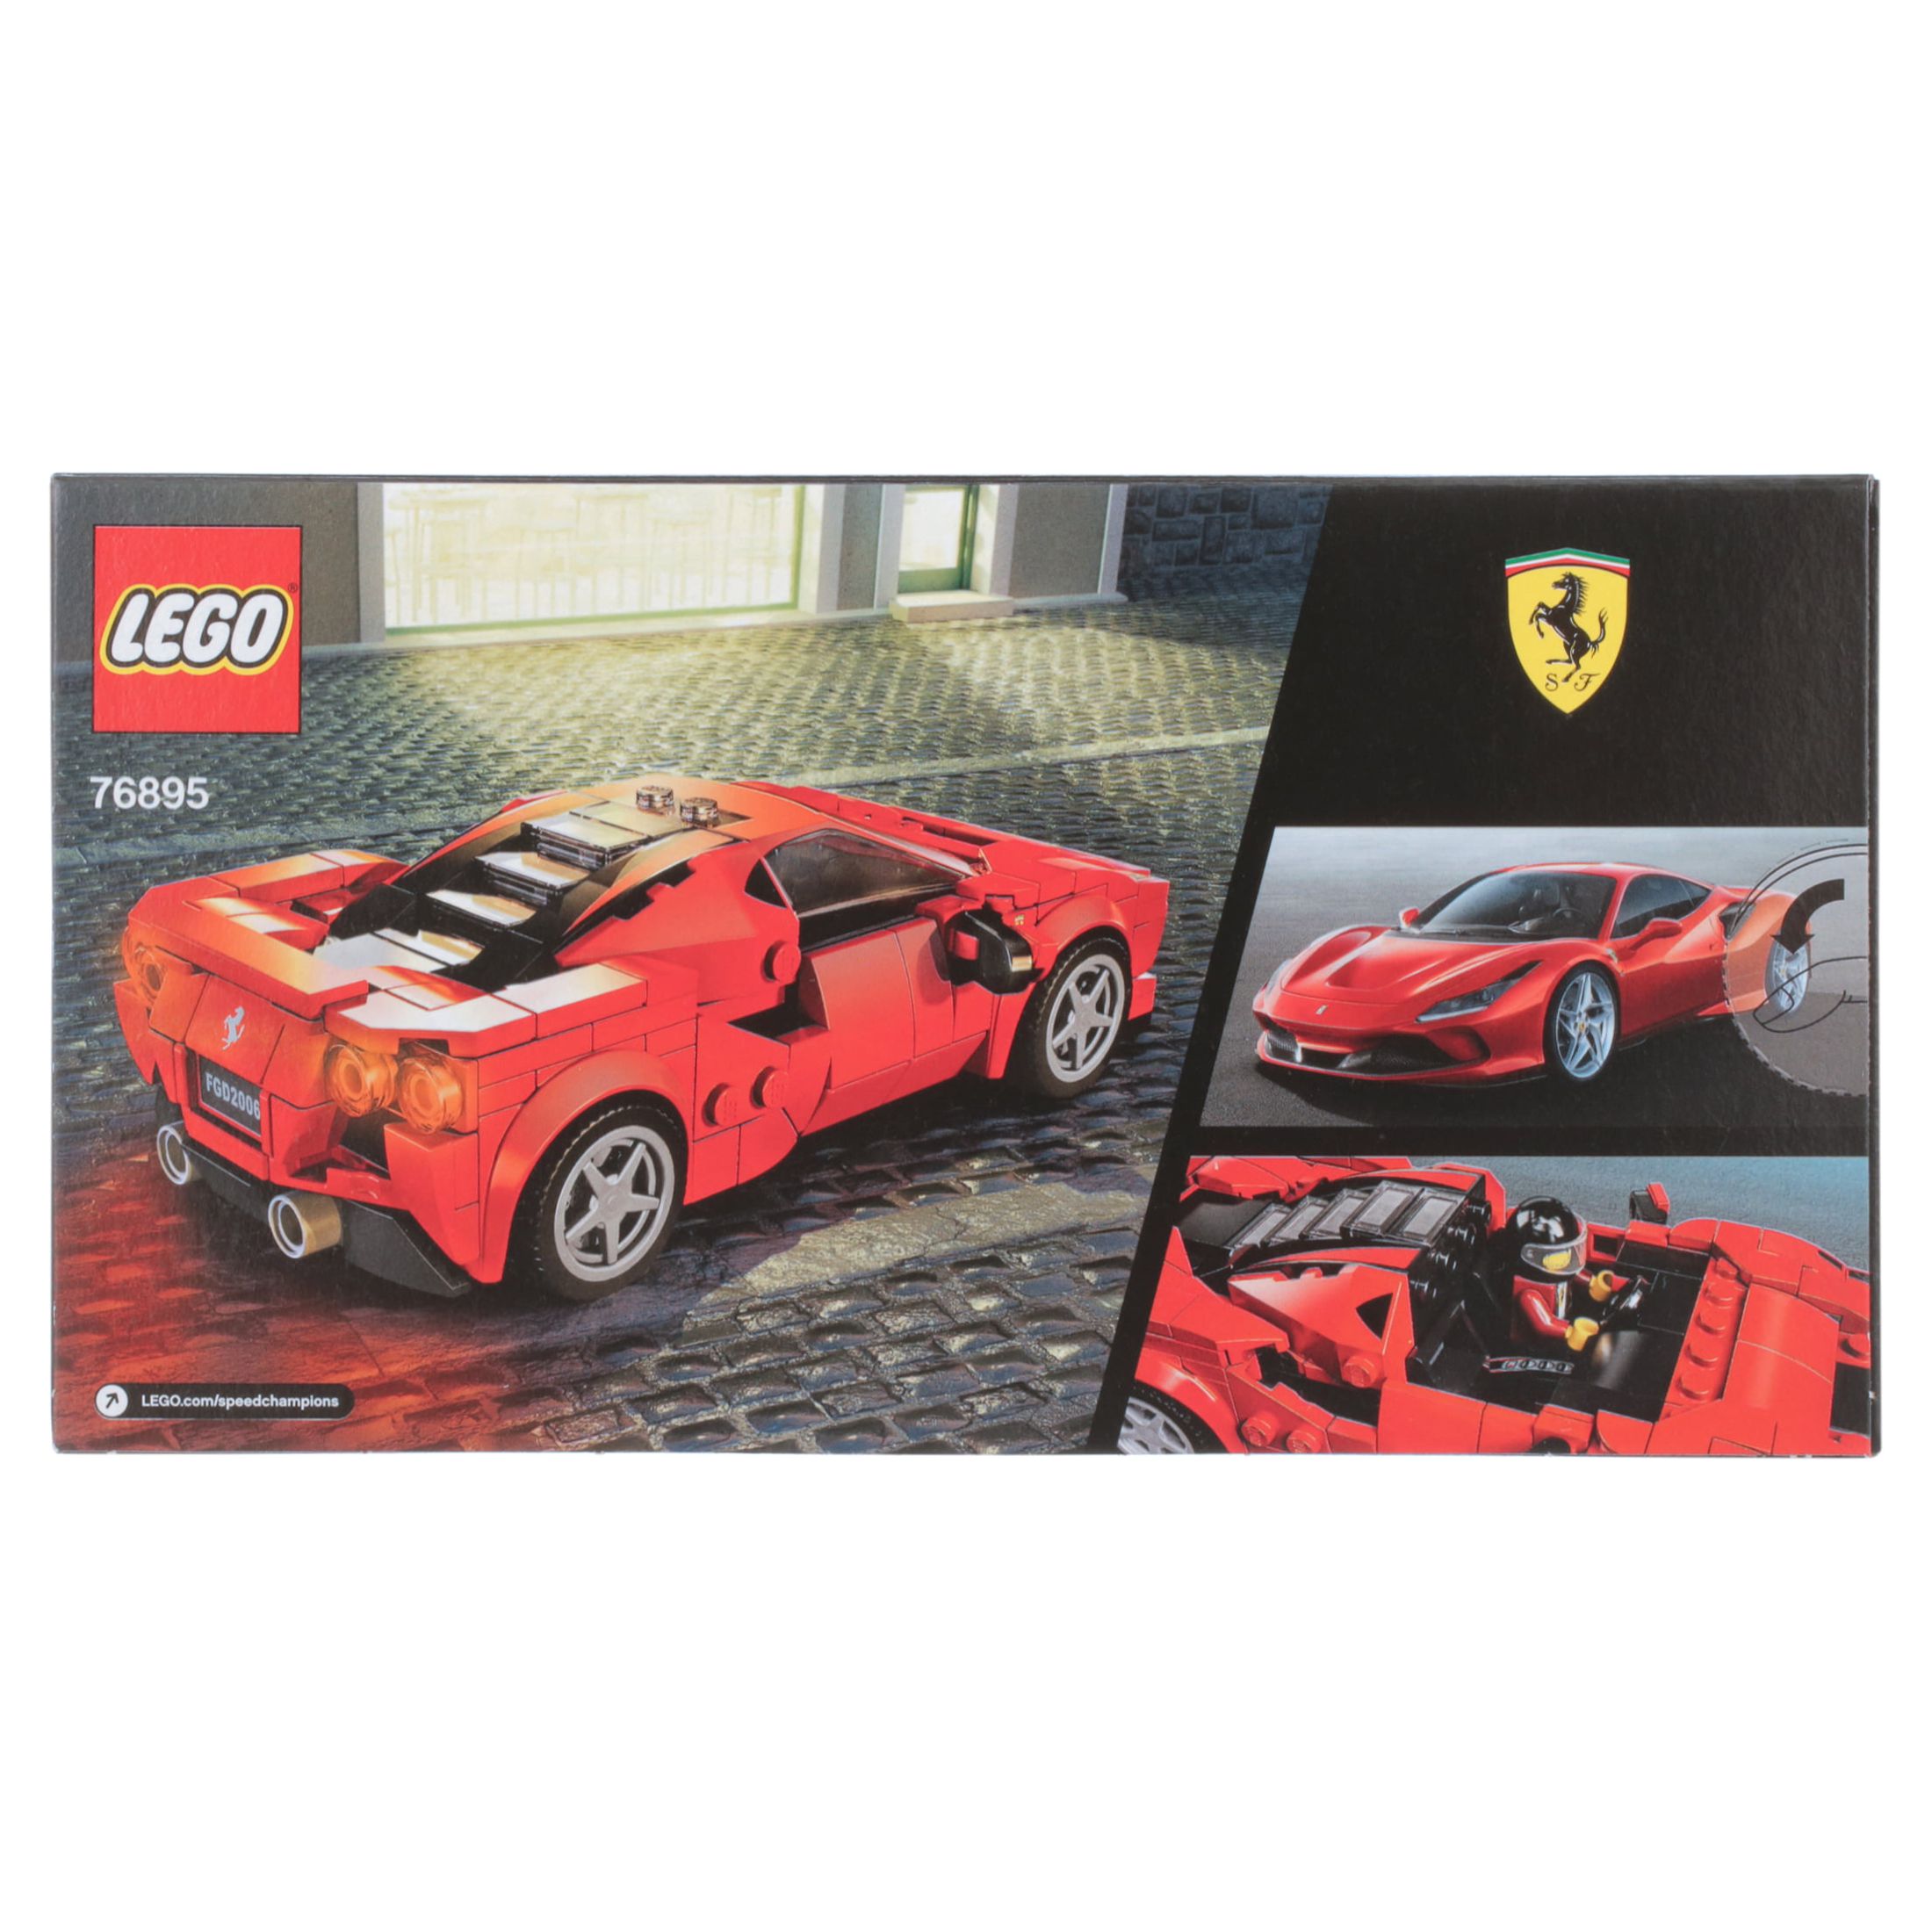 LEGO Speed Champions 76895 Ferrari F8 Tributo Racing Model Car, Vehicle Building Car (275 pieces) - image 6 of 12